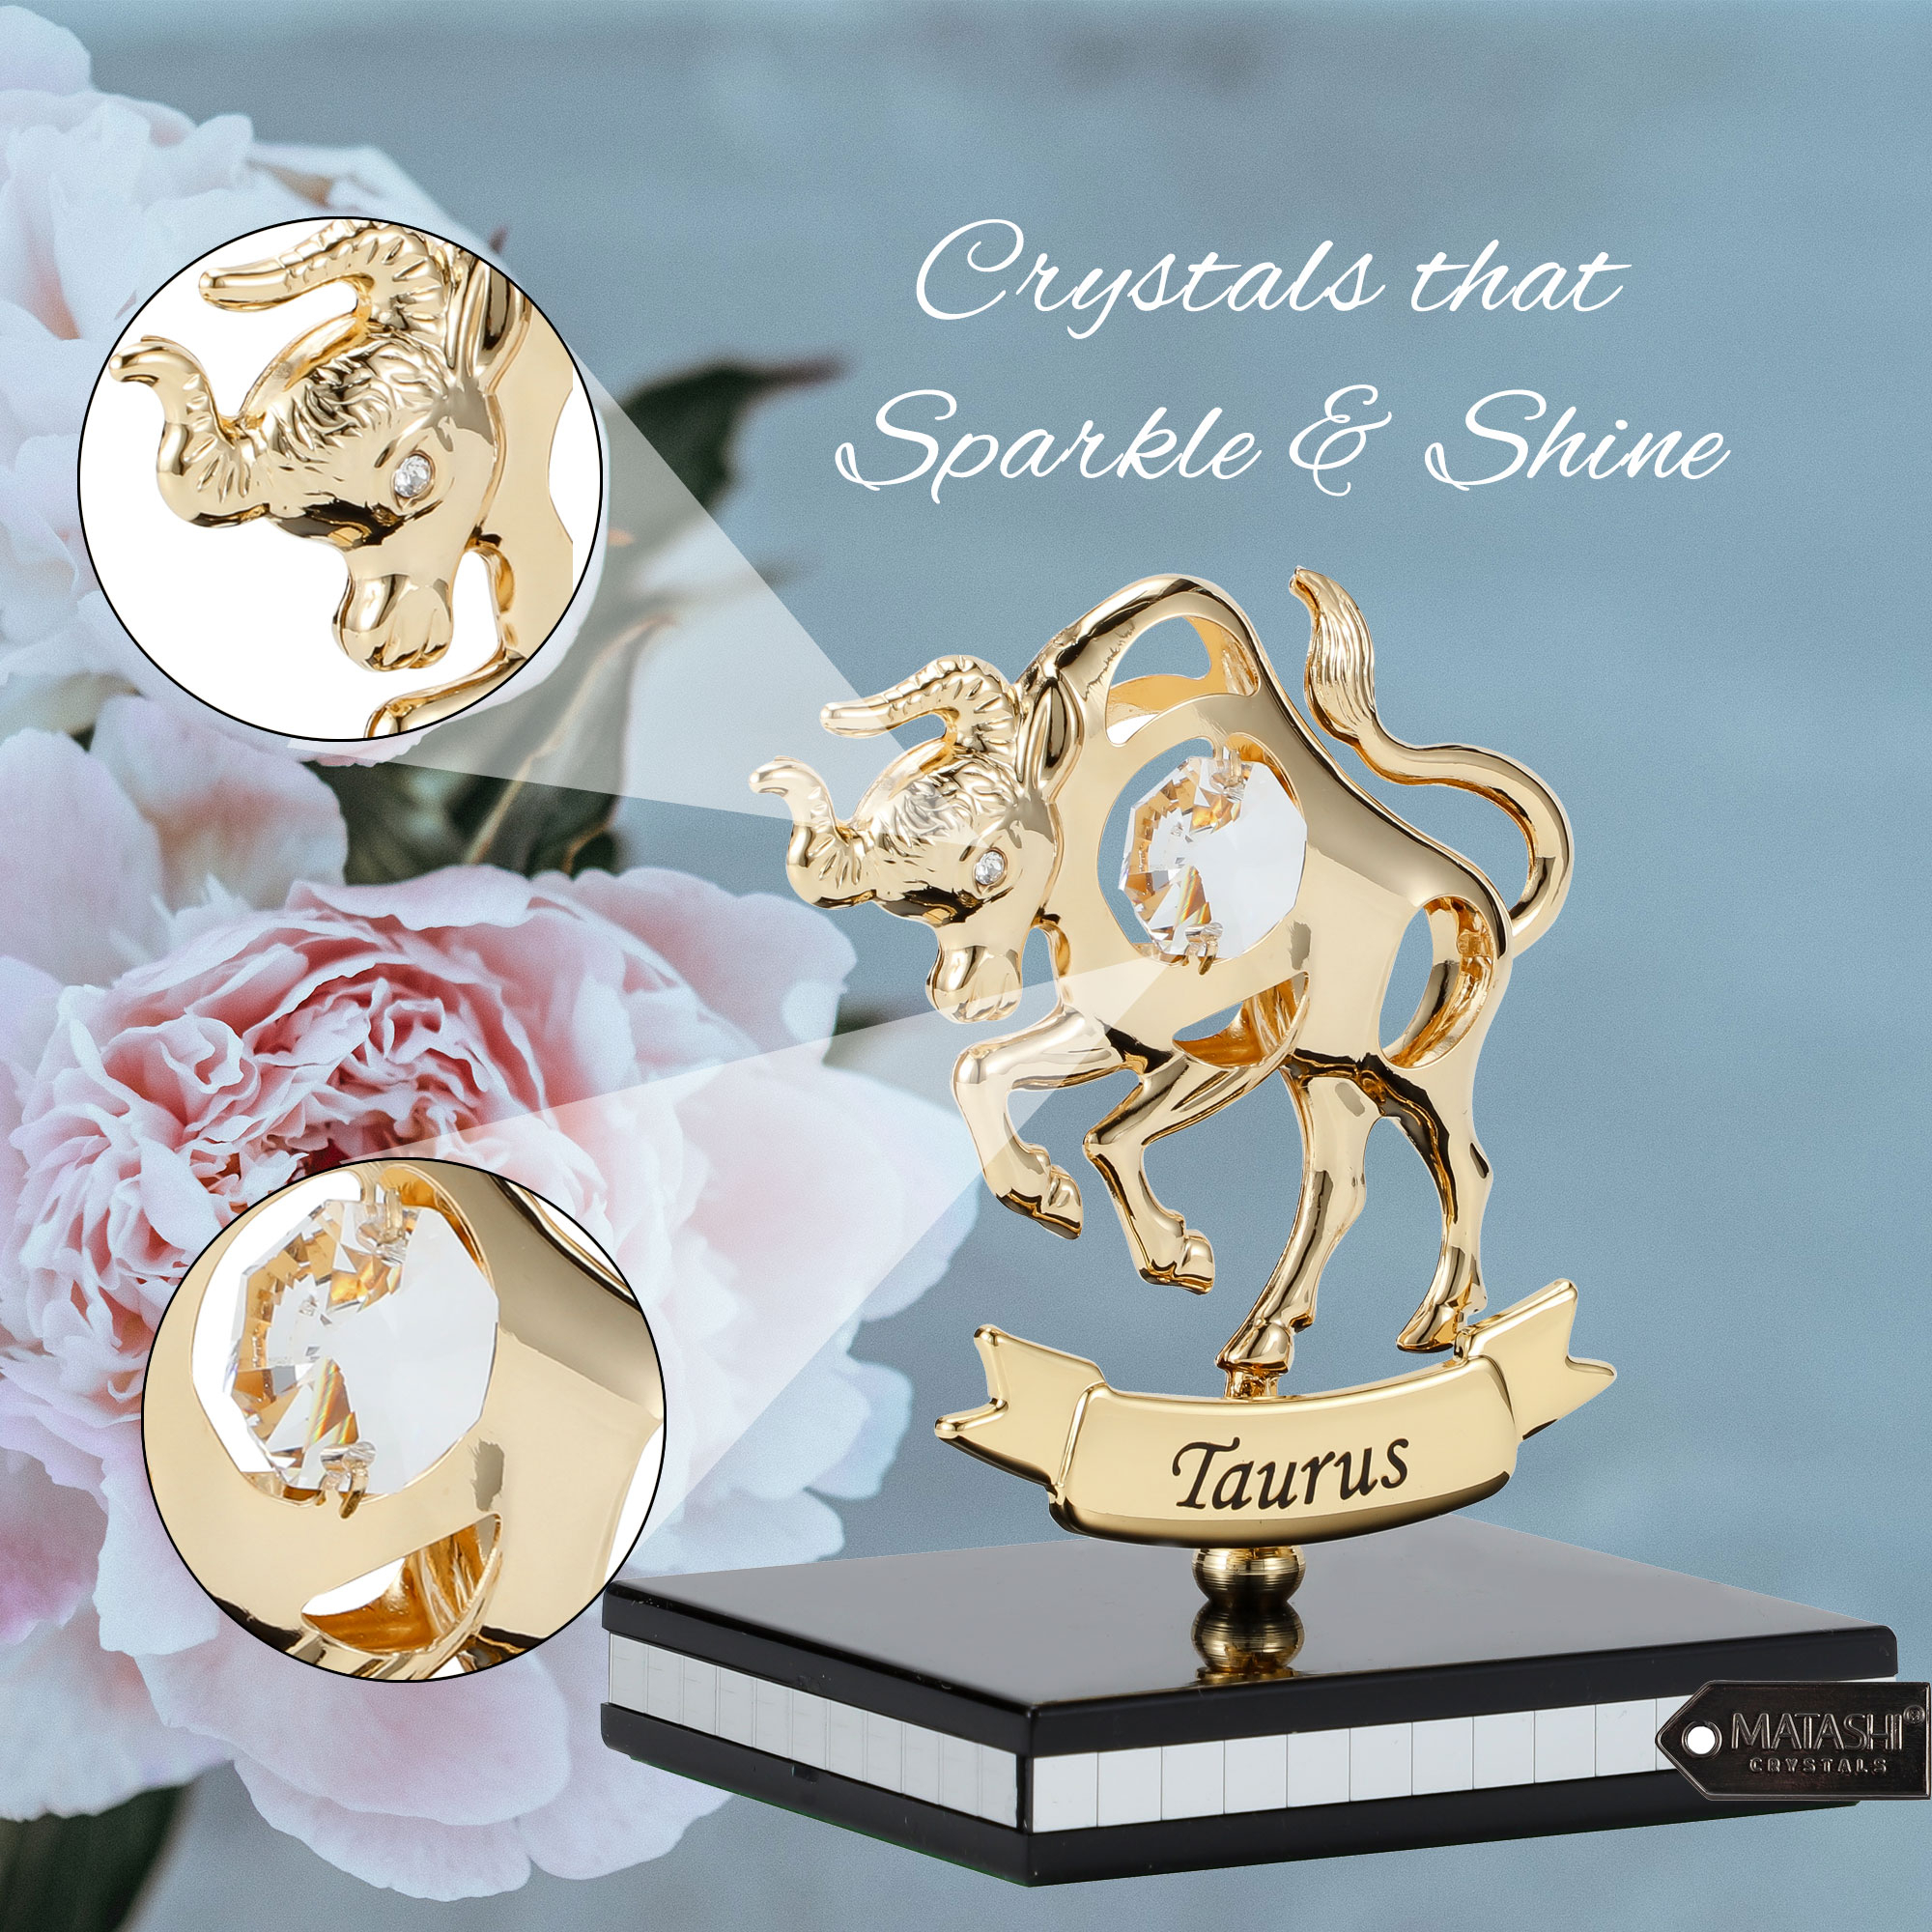 Matashi 24K Gold Plated Zodiac Astrological Sign Taurus Figurine Statuette On Stand Studded With Crystals Gift For Mom Girlfriend Wife Dad